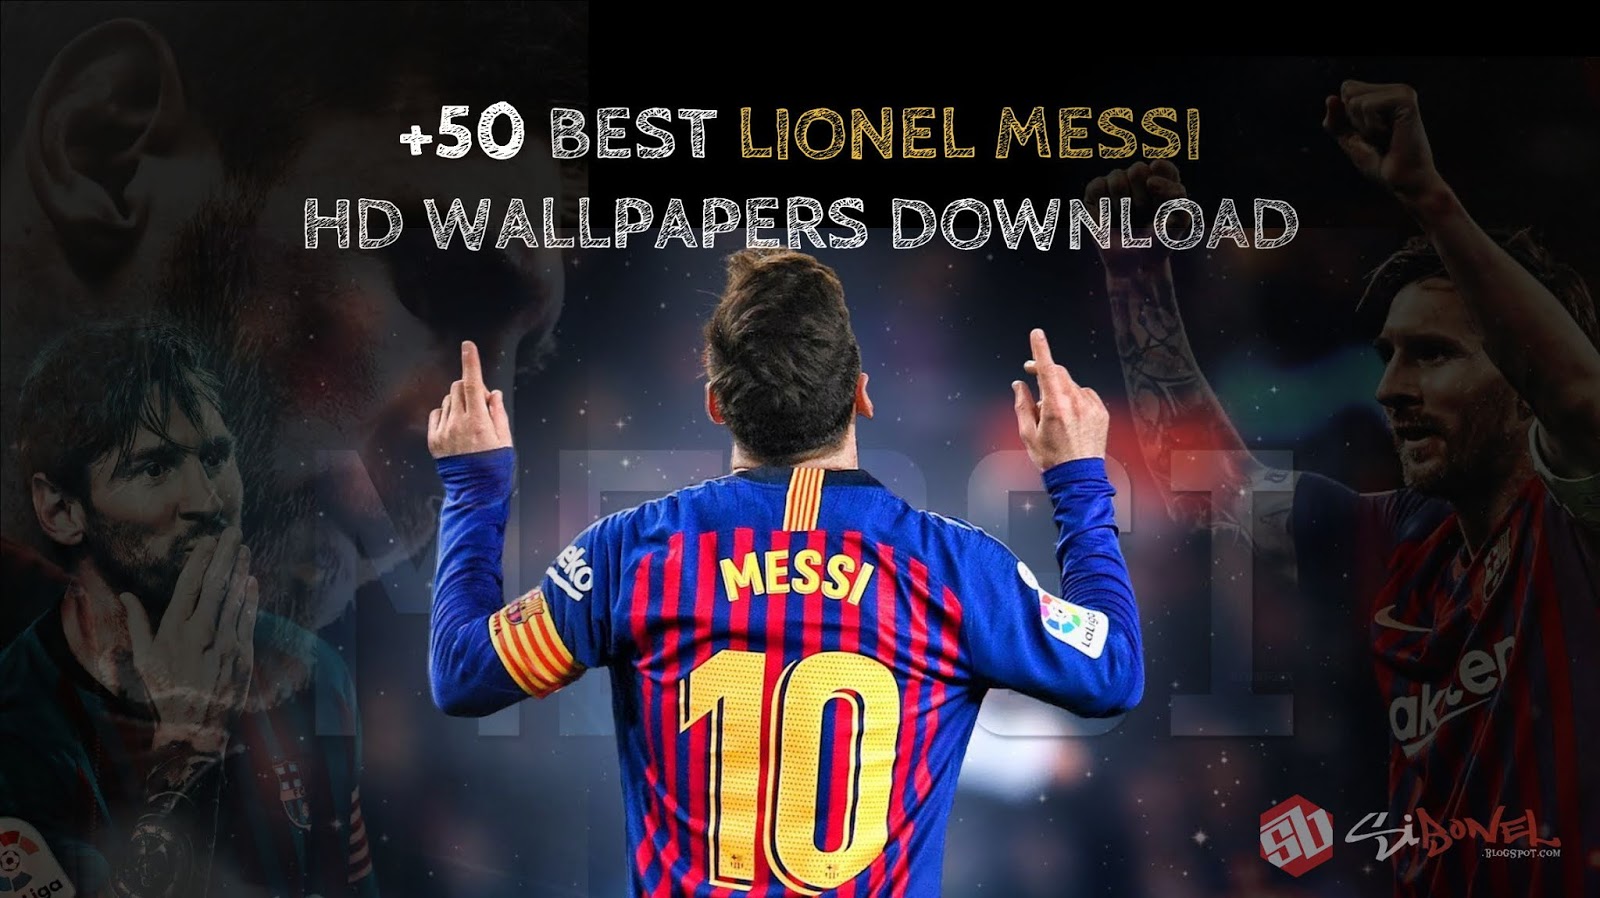 Best Lionel Messi Hd Wallpapers Download [2019] - Messi Hd Wallpaper Download - HD Wallpaper 